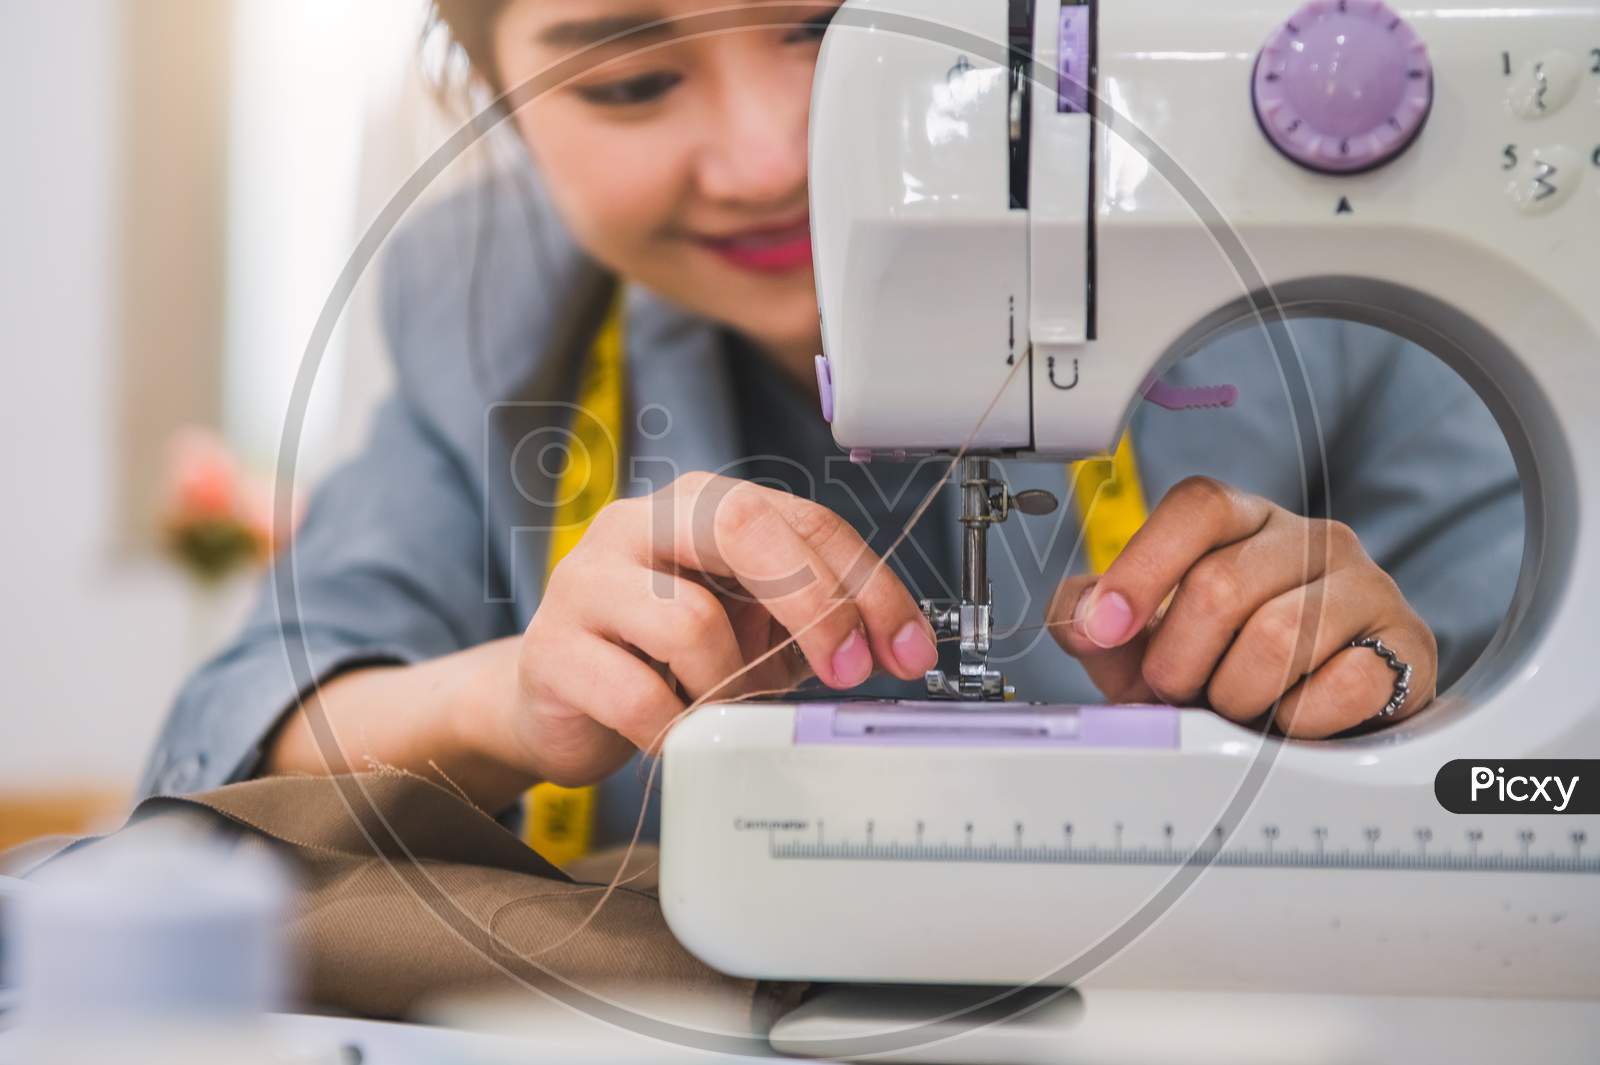 Closeup Of Attractive Female Fashion Designer Hand Working Workshop With Sewing Machine. Stylish Fashionista Woman Creating New Cloth Design Collection. Tailoring And Sewing Lifestyle And Occupation